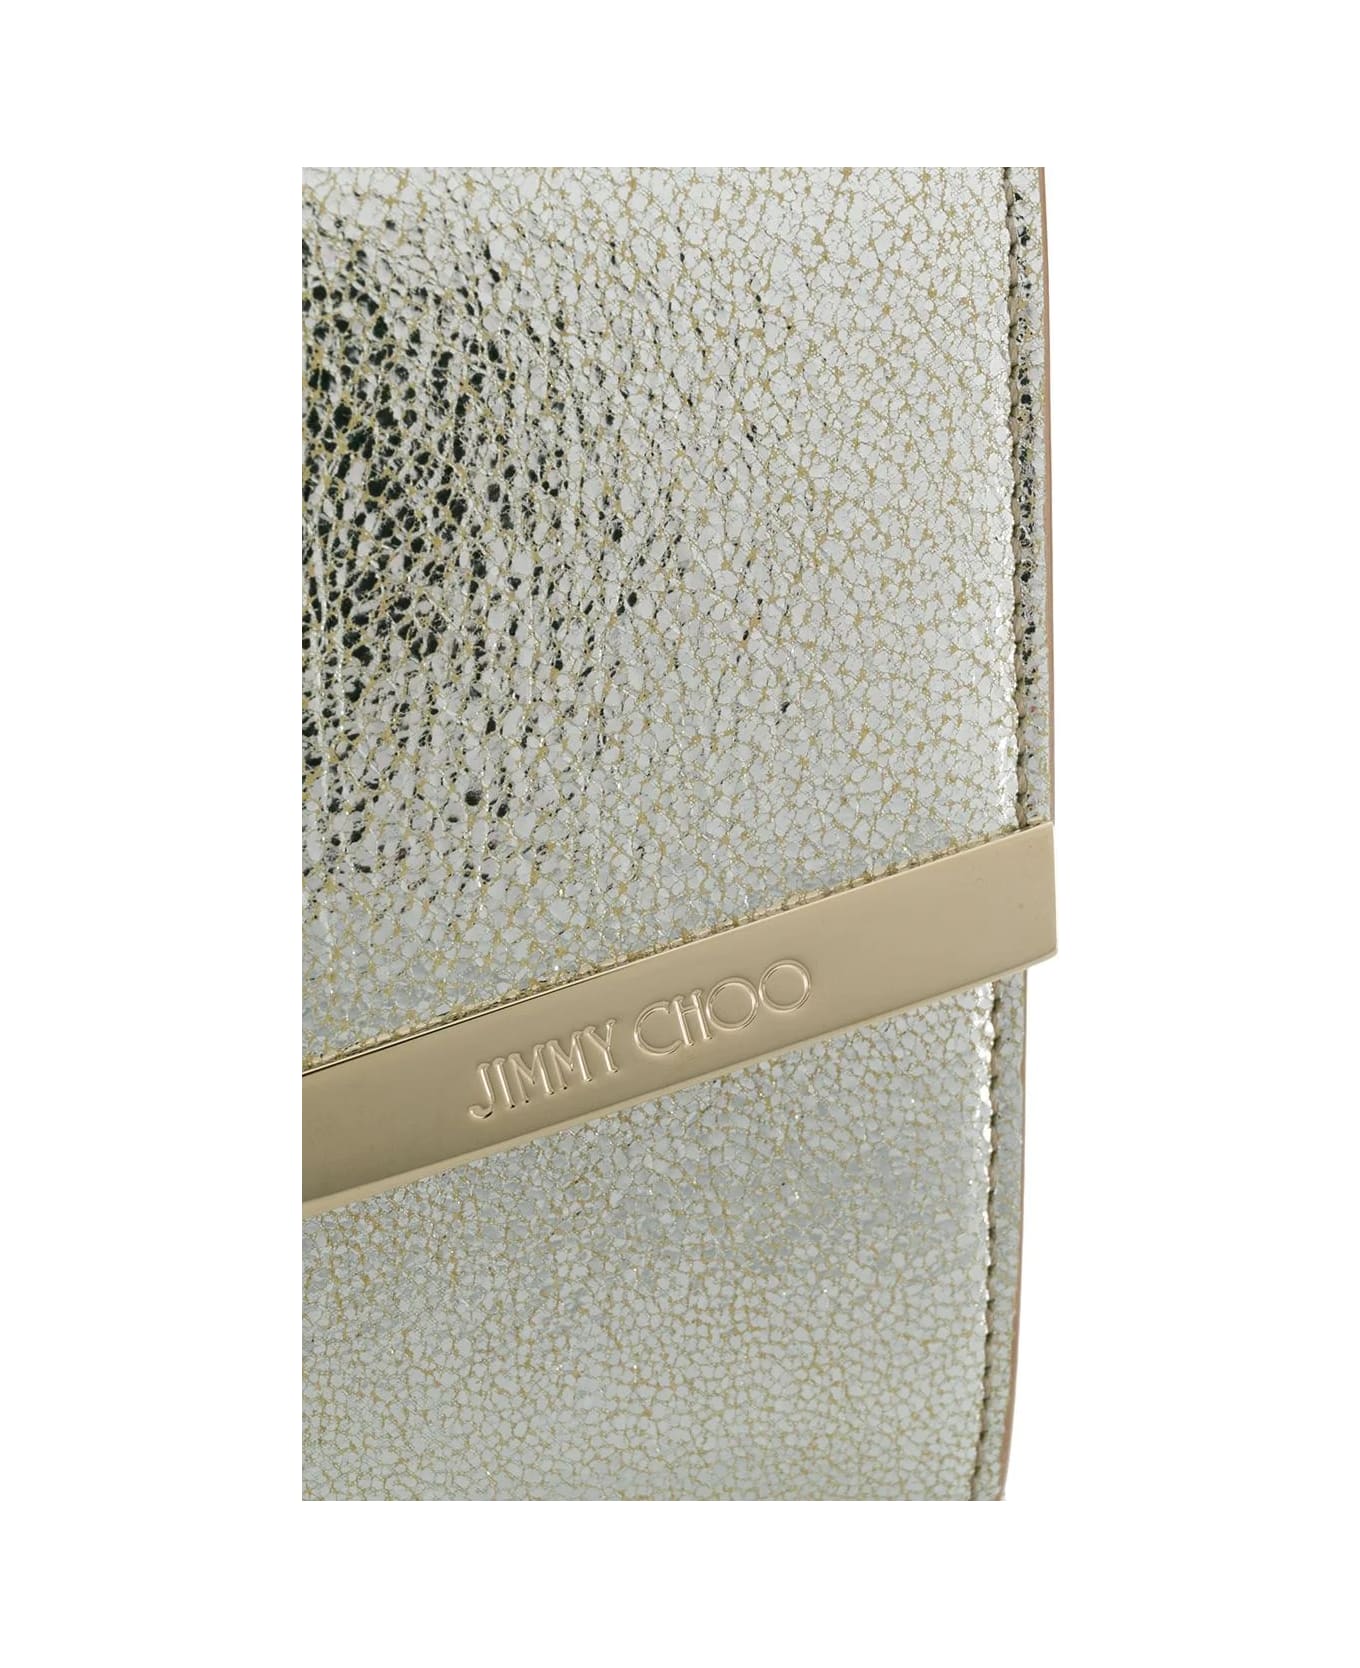 Jimmy Choo Emmie Clutch Bag In Champagne Leather With Glitter - White クラッチバッグ